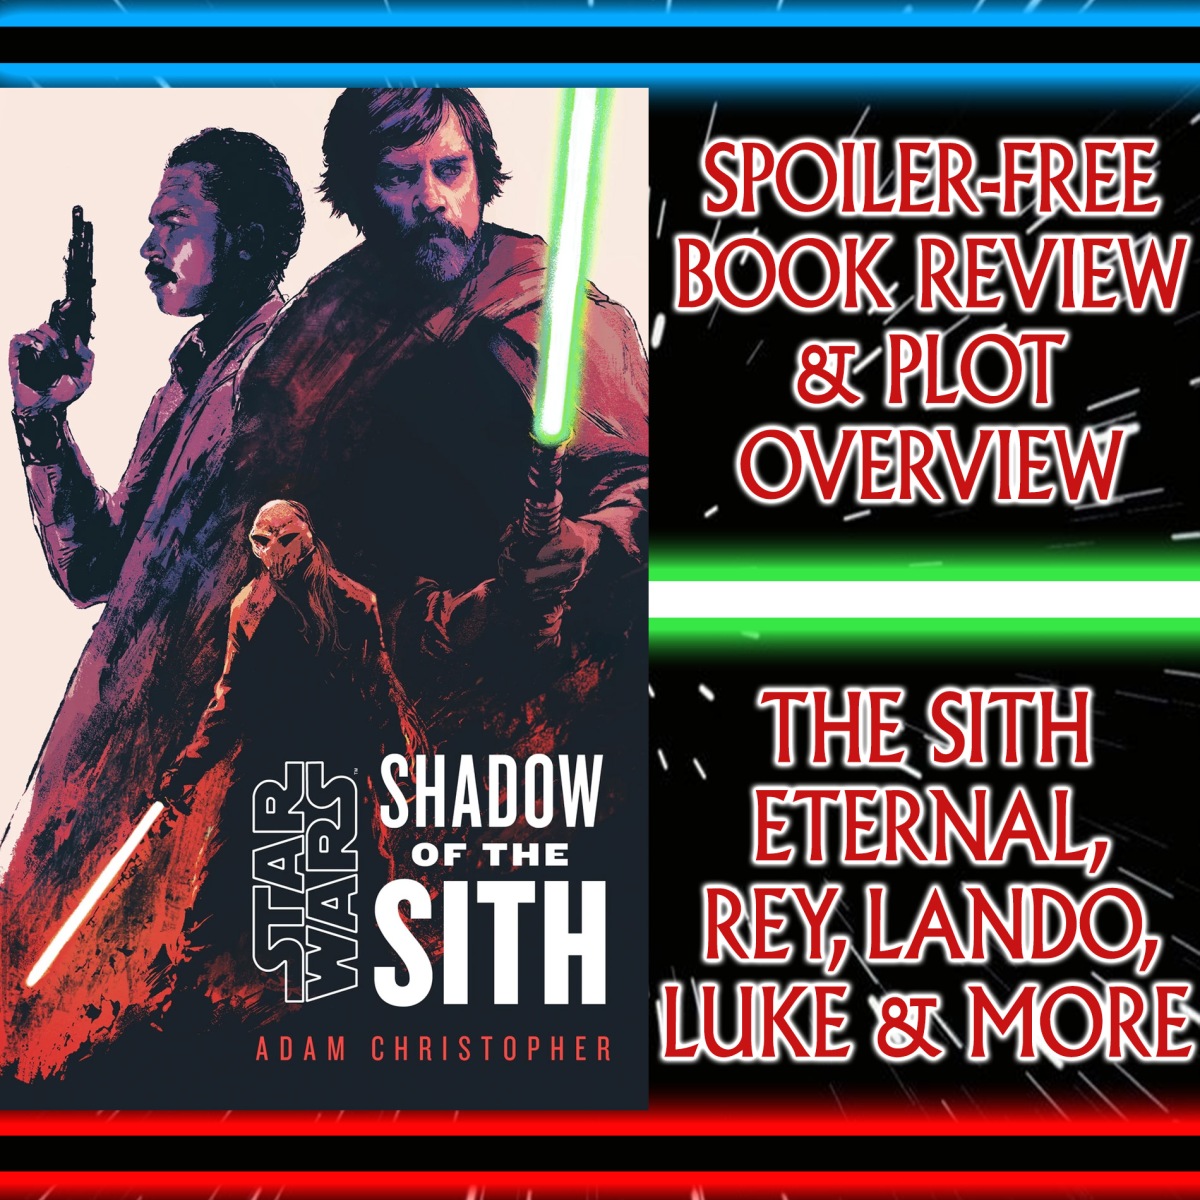 Star Wars: Shadow Of The Sith By Adam Christopher Spoiler-Free Book Review & Plot Overview – The Sith Eternal, Luke Skywalker, Rey & Lando Between The Original & Sequel Trilogies